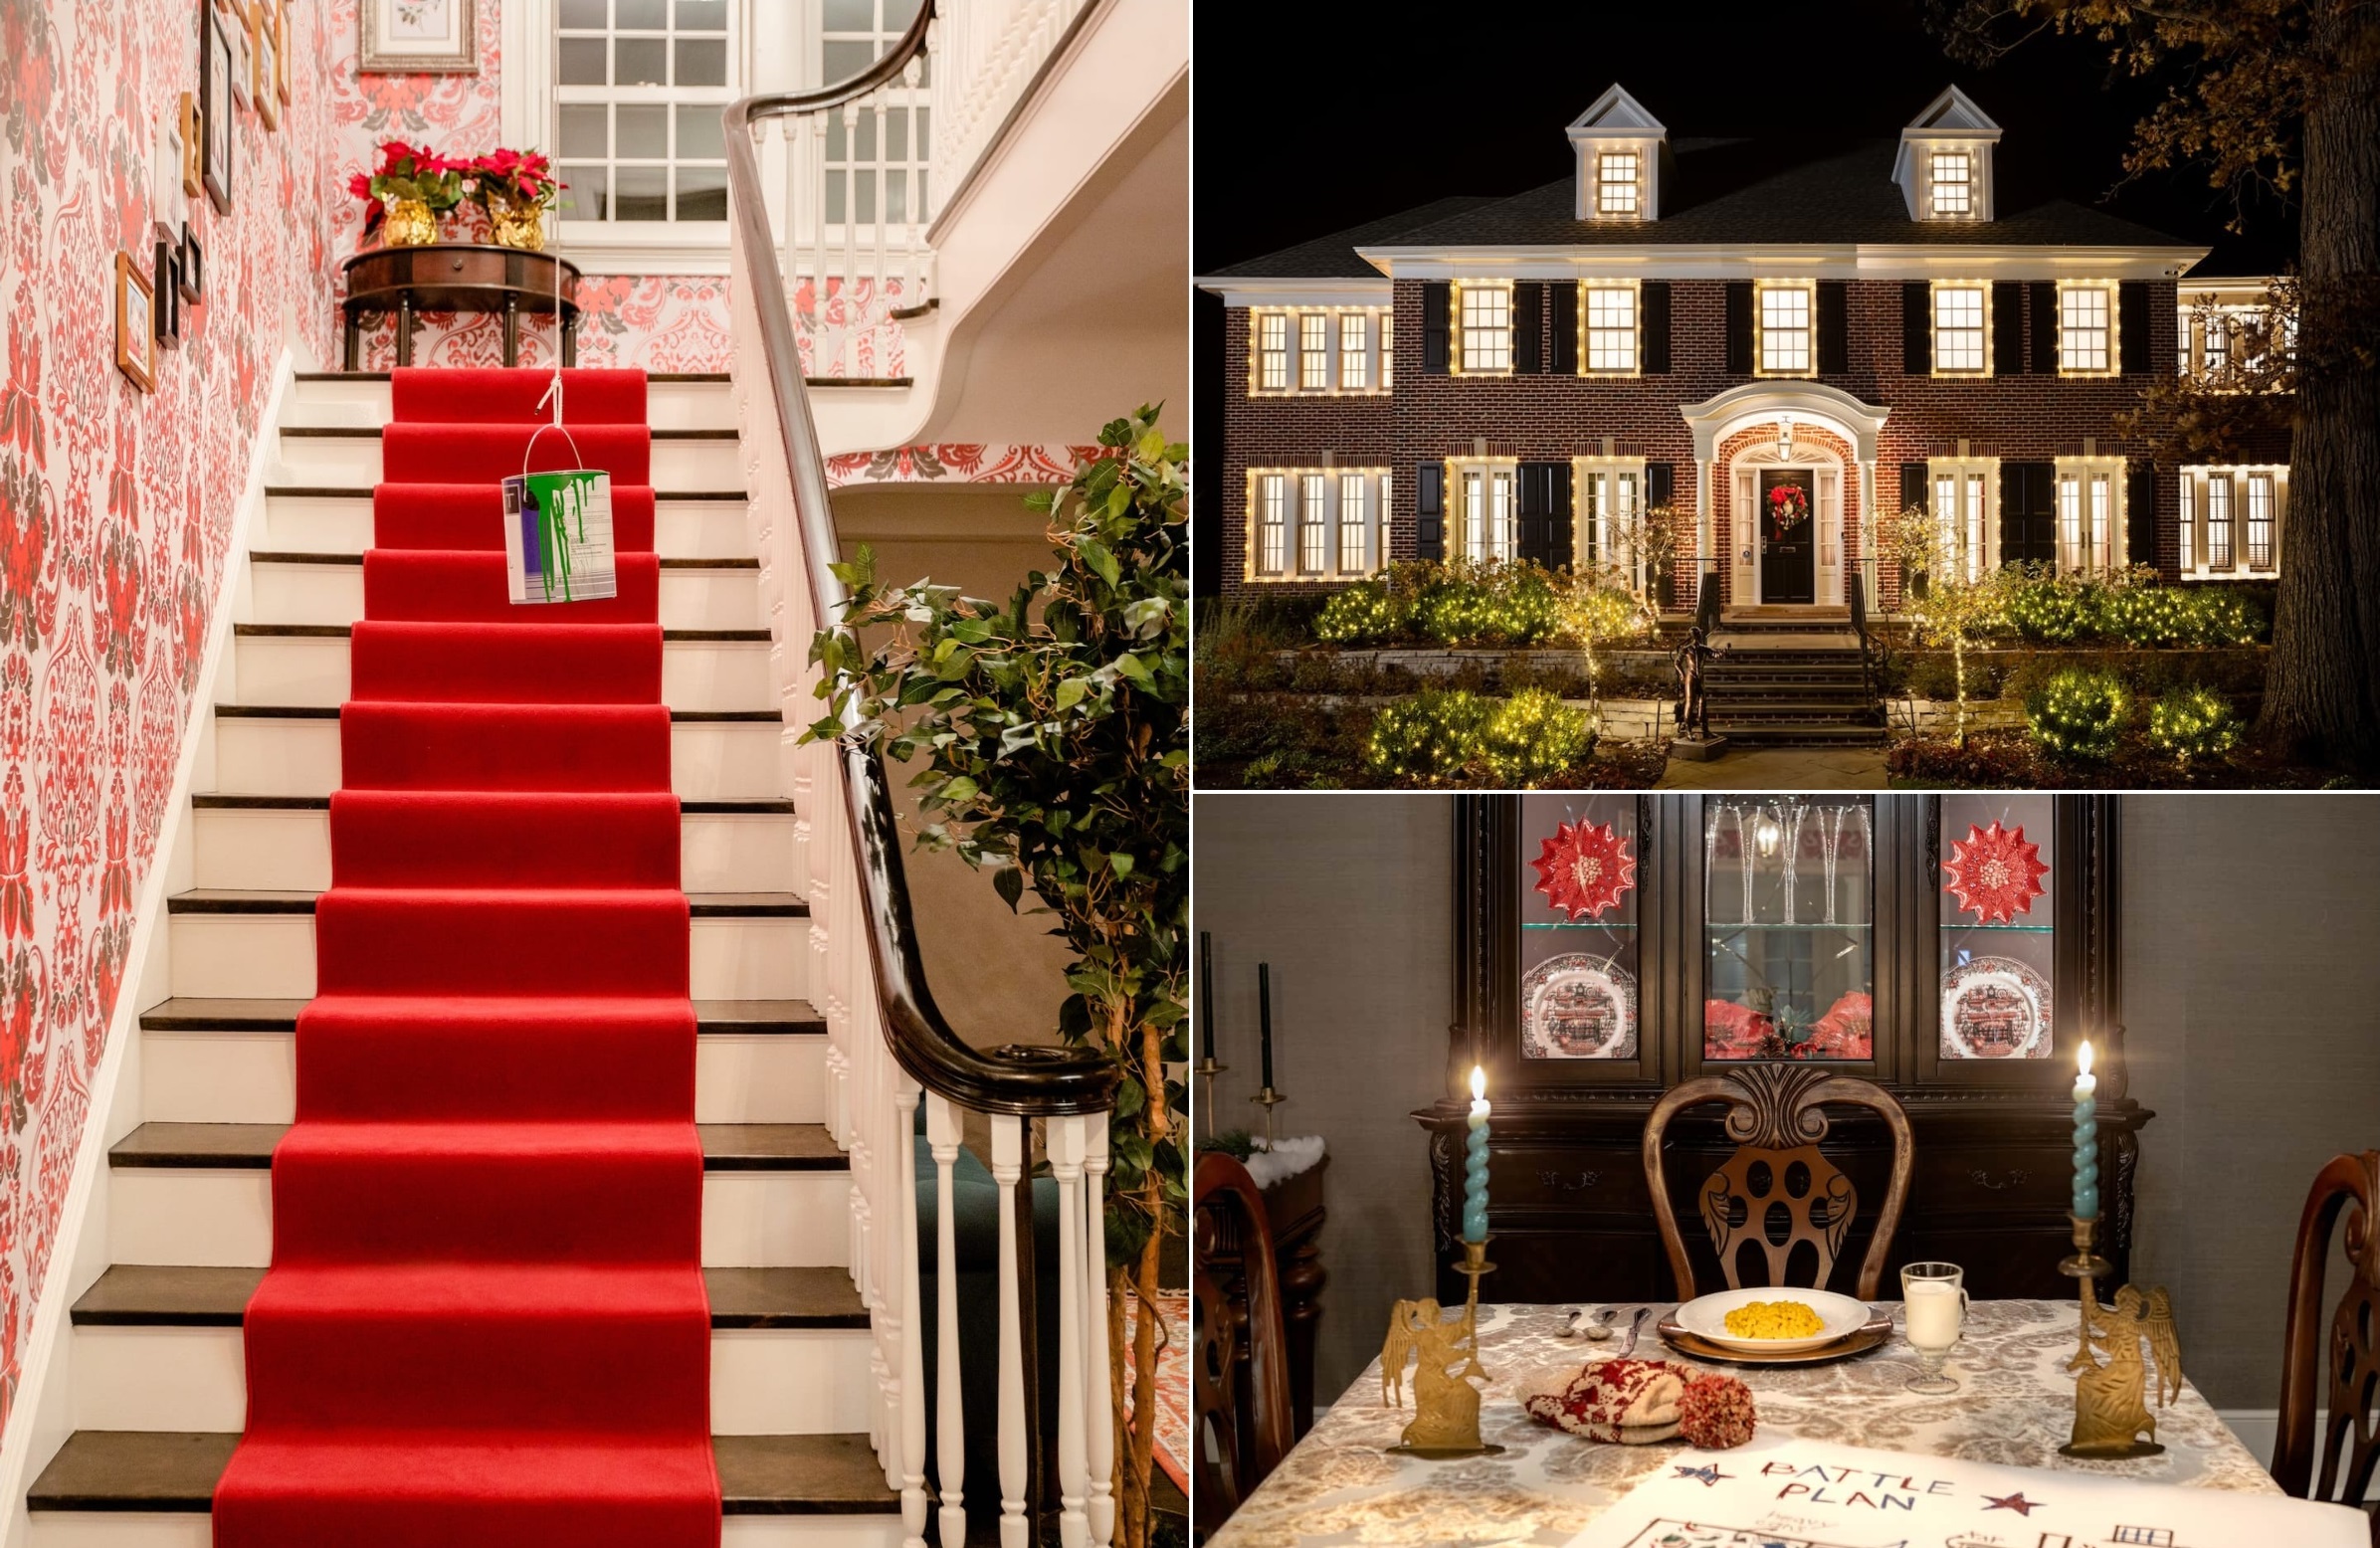 Here's How You Can Airbnb the Original 'Home Alone' House